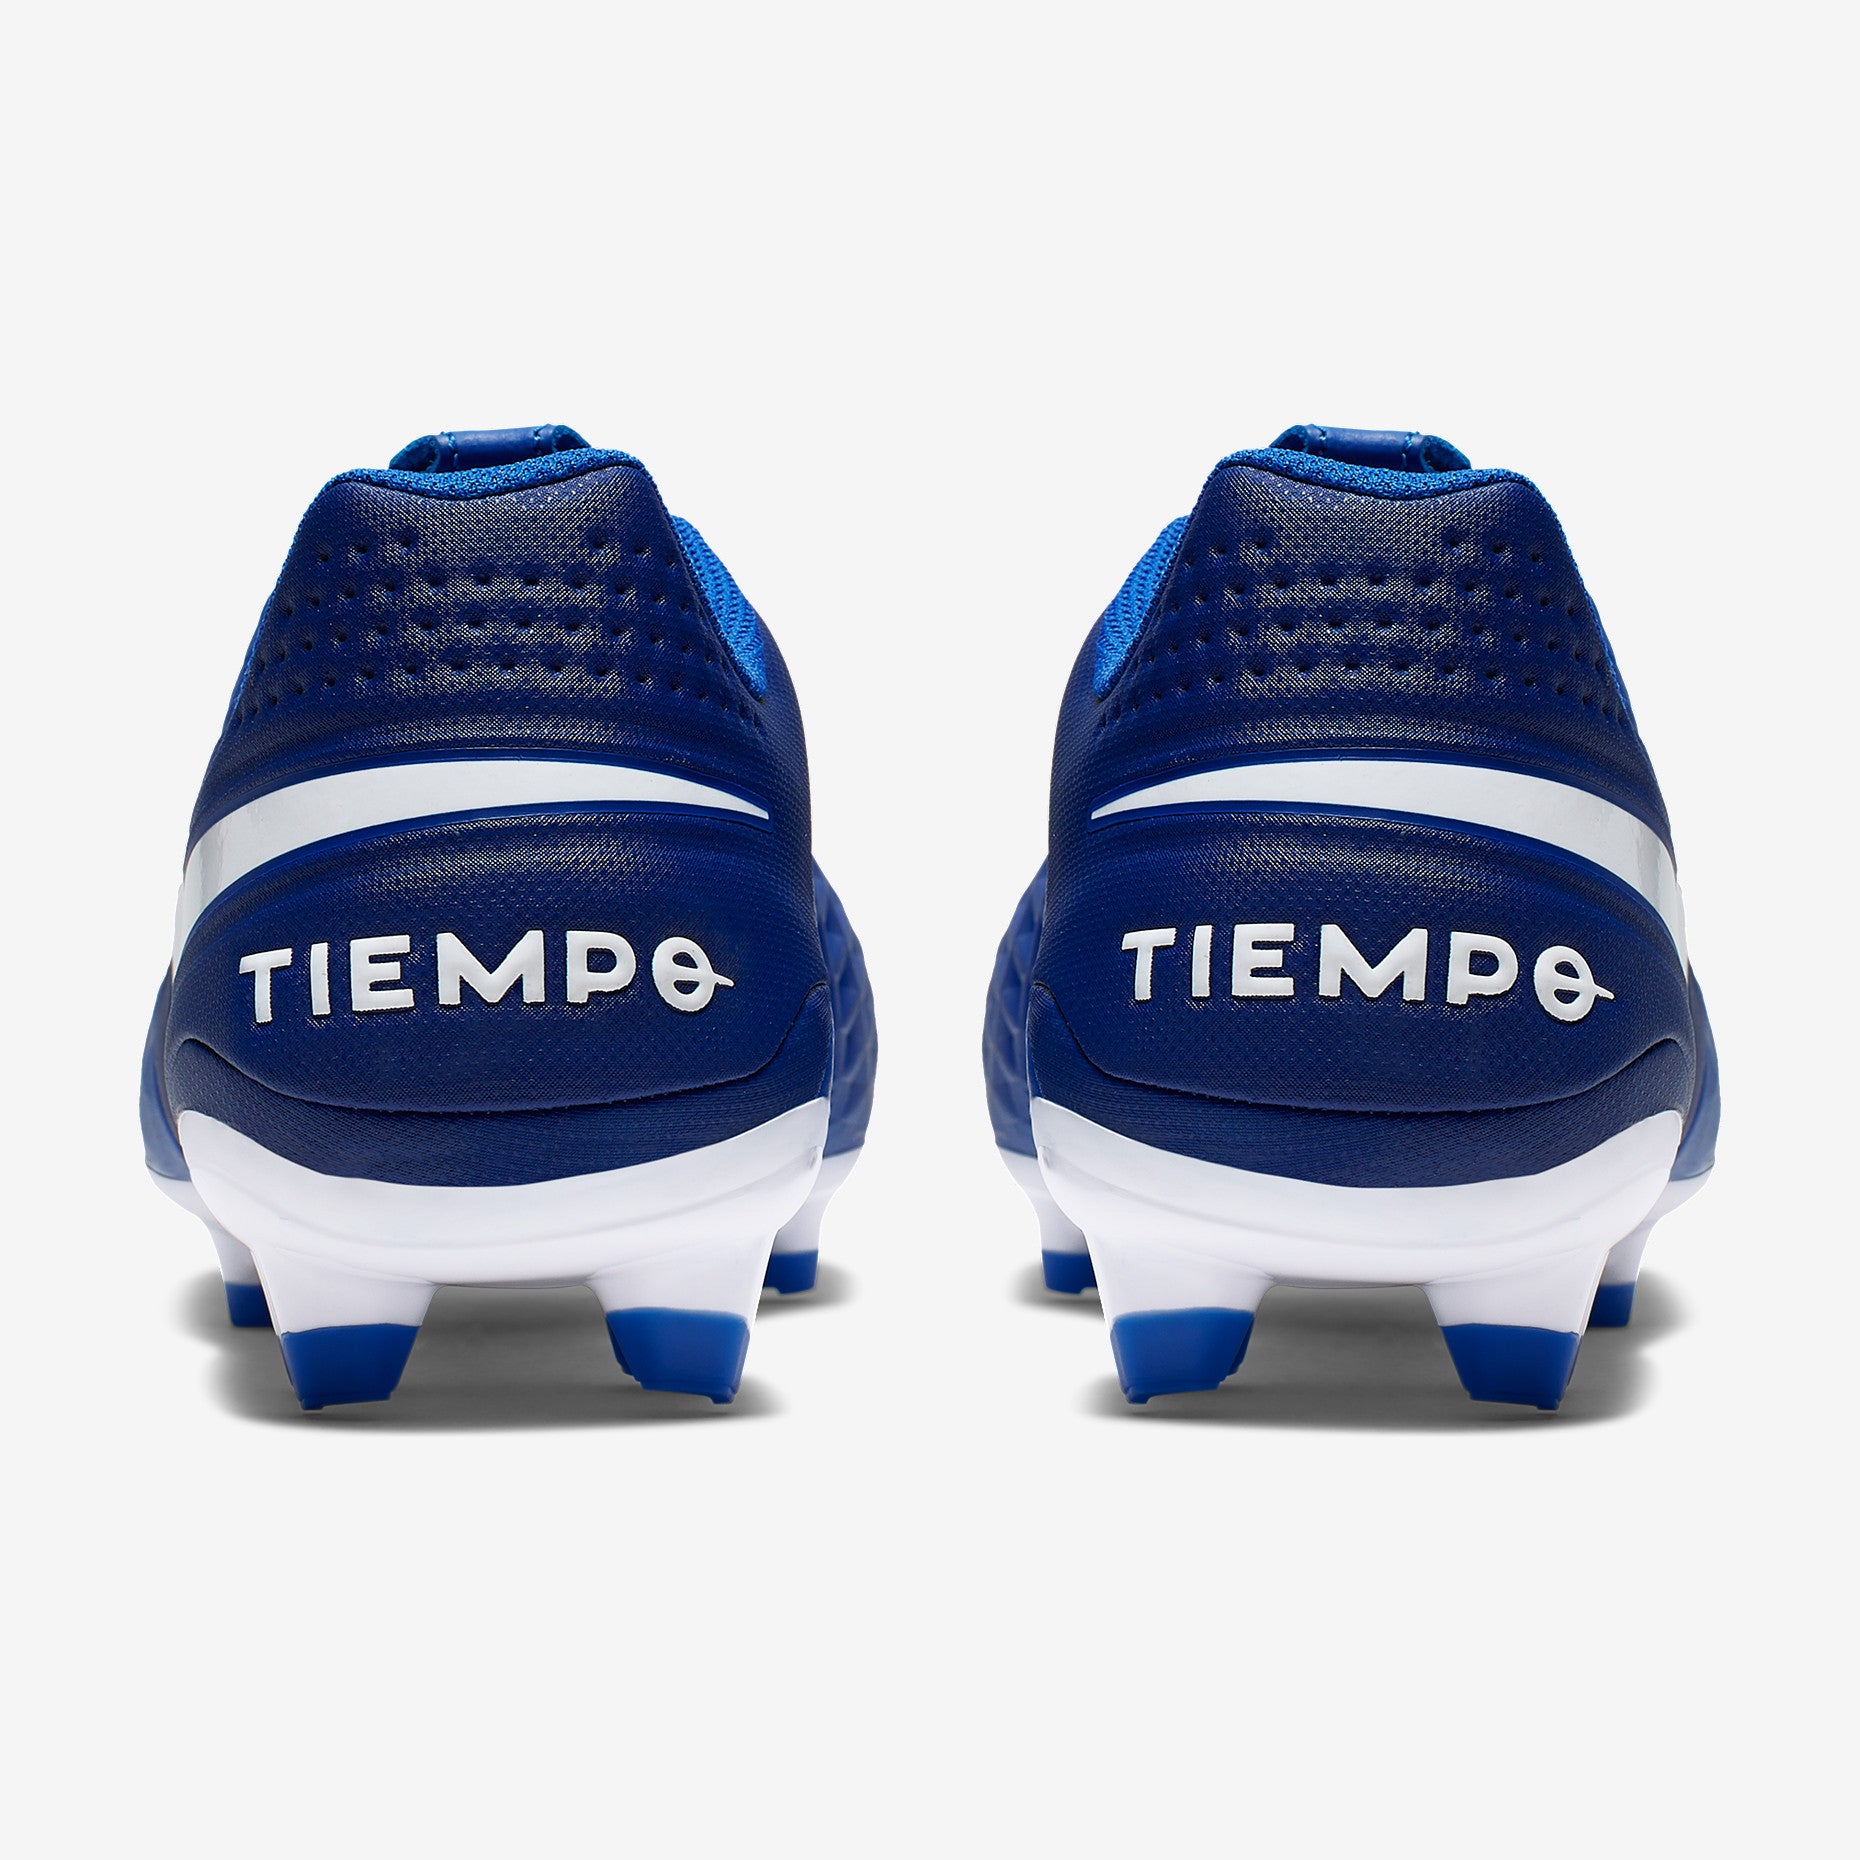 Find The Best Of Nike Tiempo Legend VIII Pro TF New.